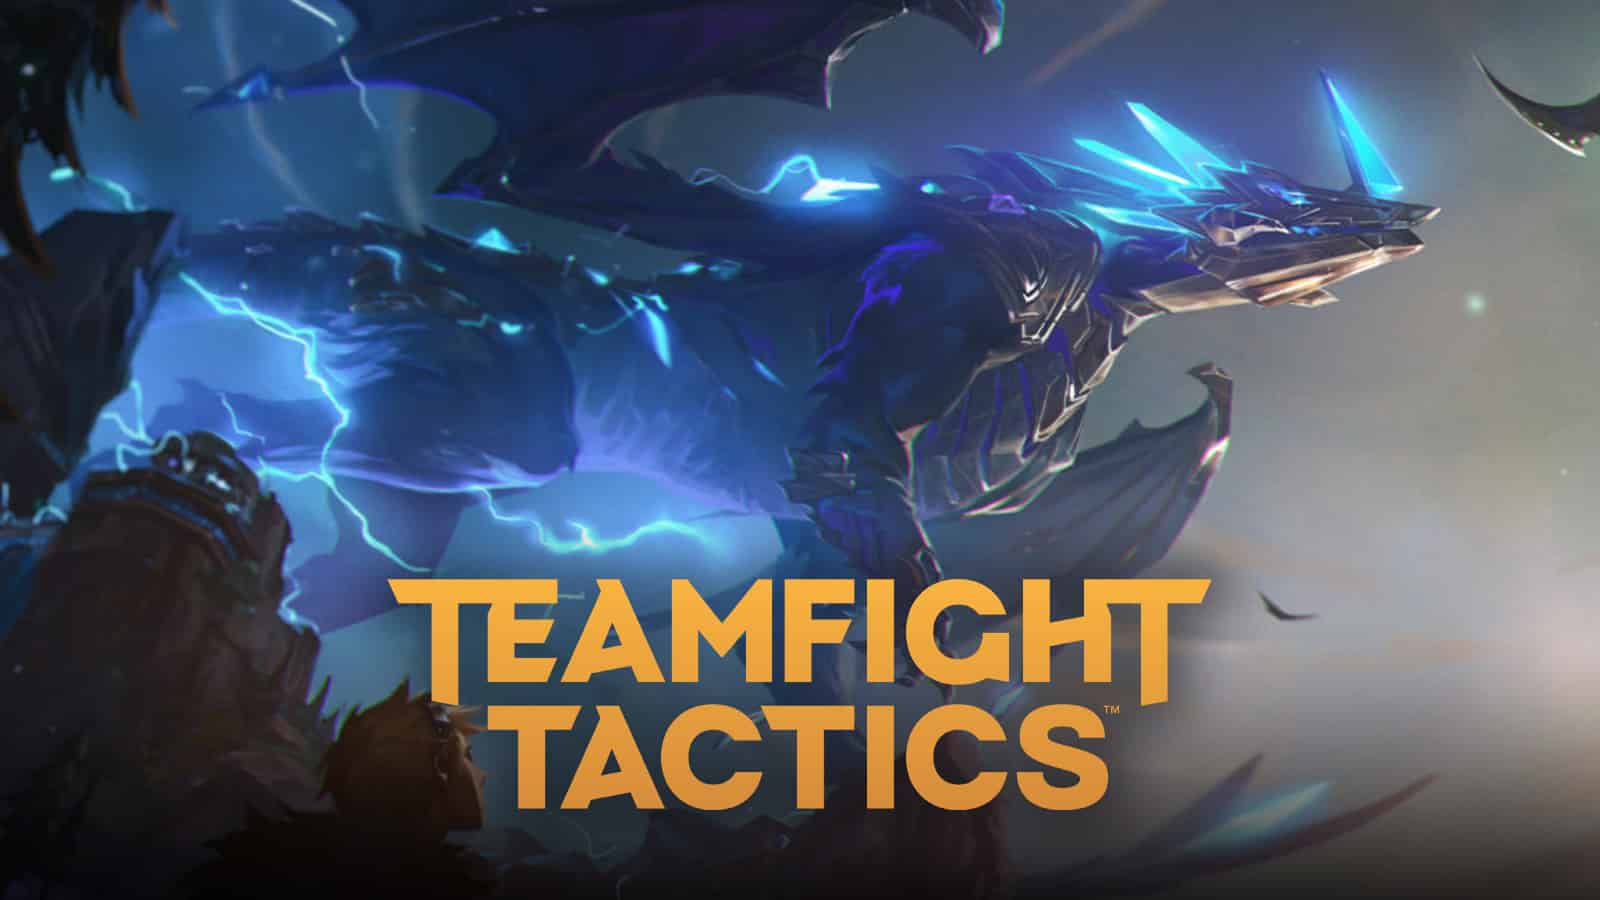 Every TFT Set 7 champion & trait added for Dragonlands expansion